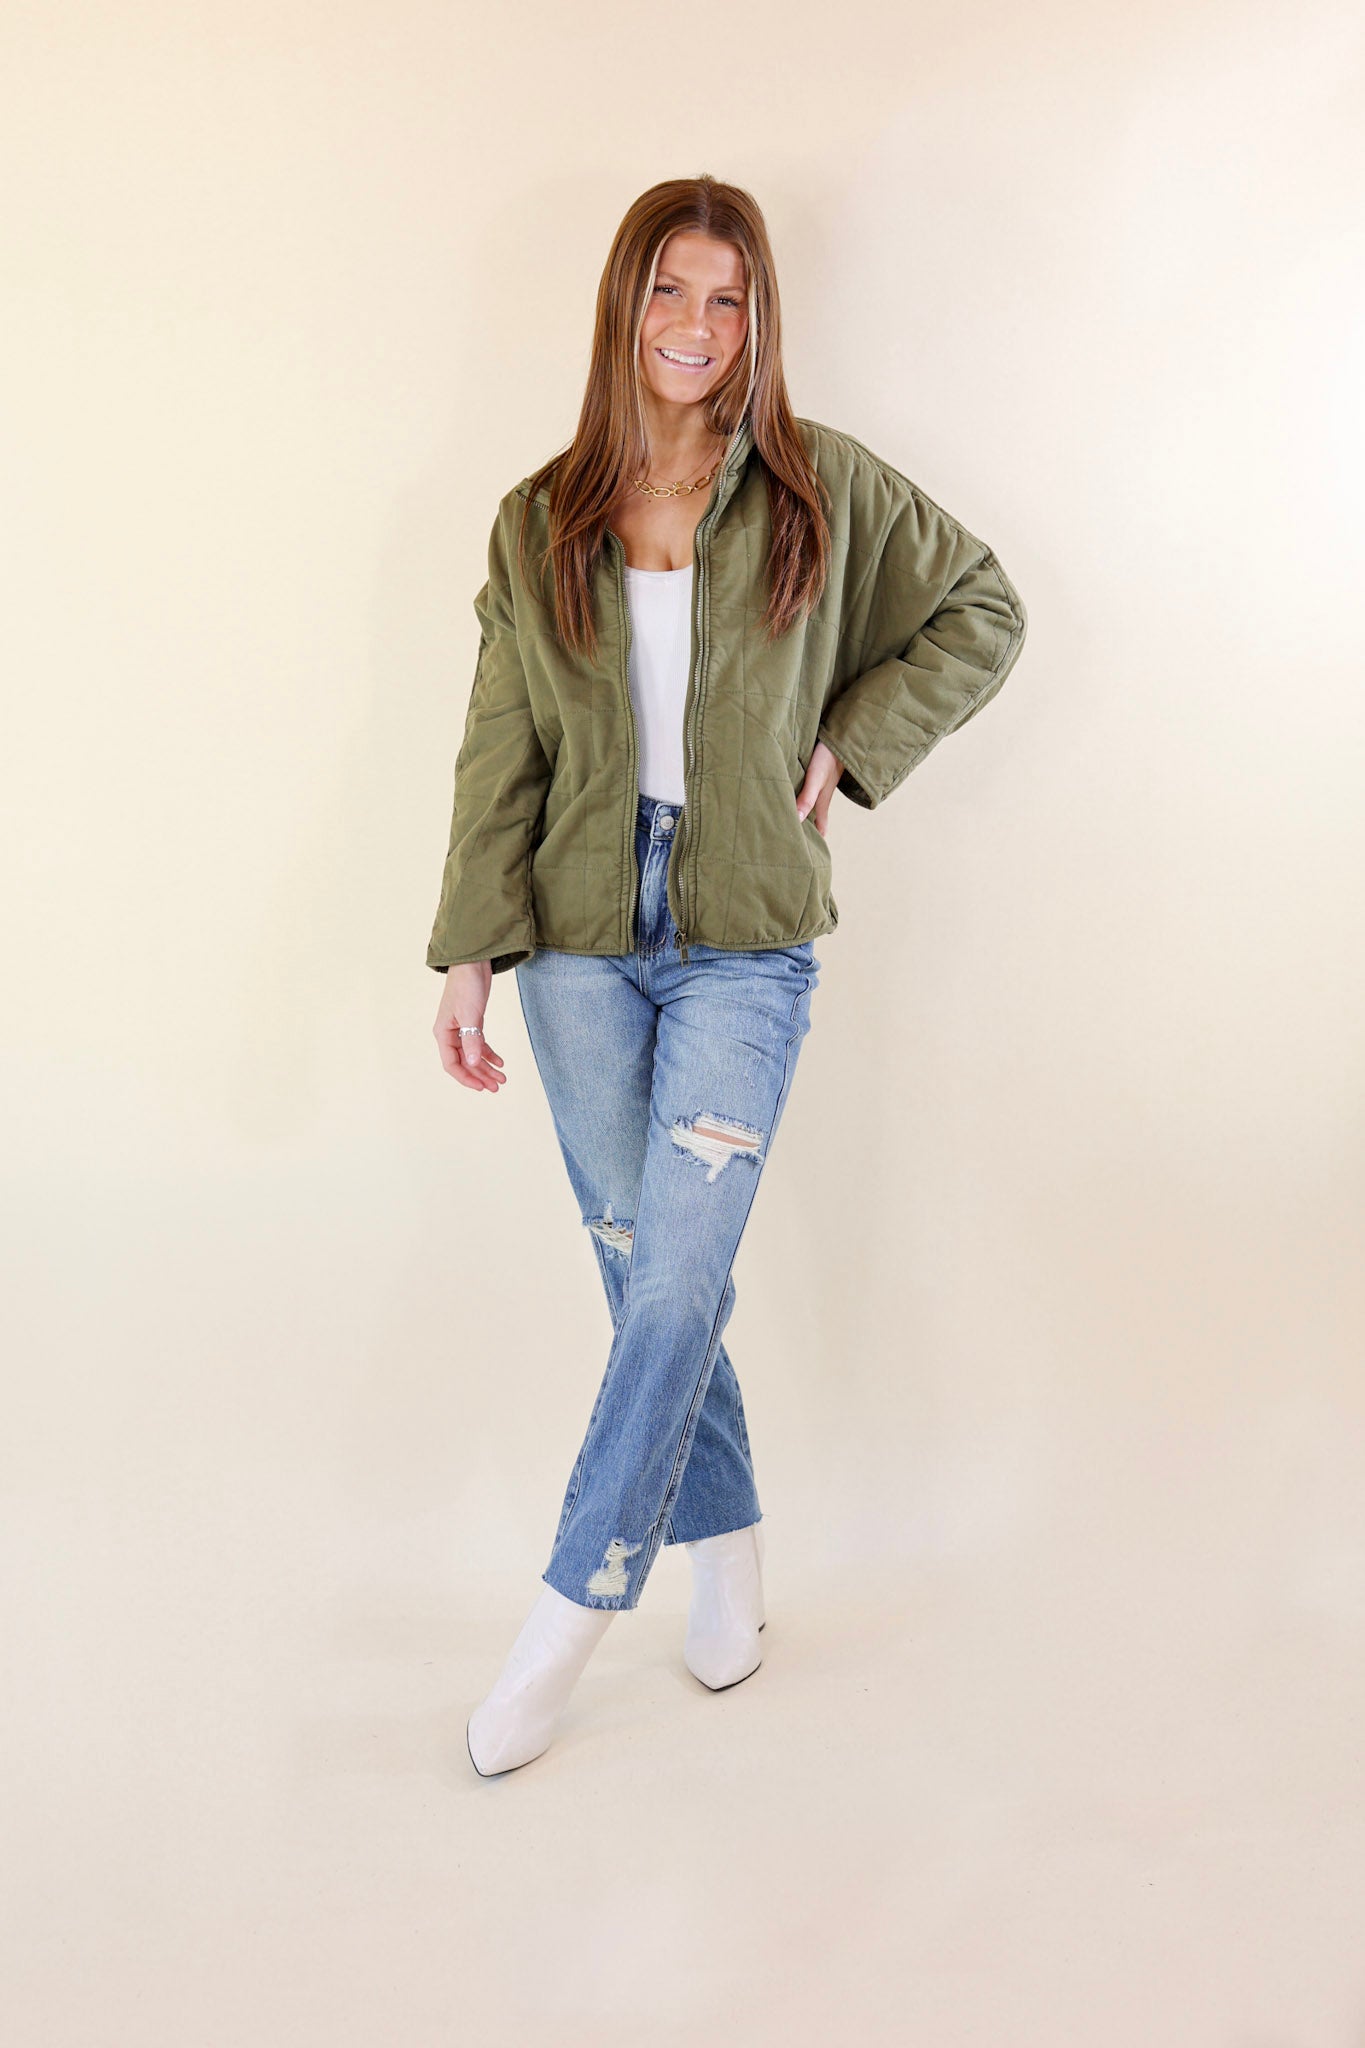 Park Slope Quilted Zip Up Jacket in Olive Green - Giddy Up Glamour Boutique